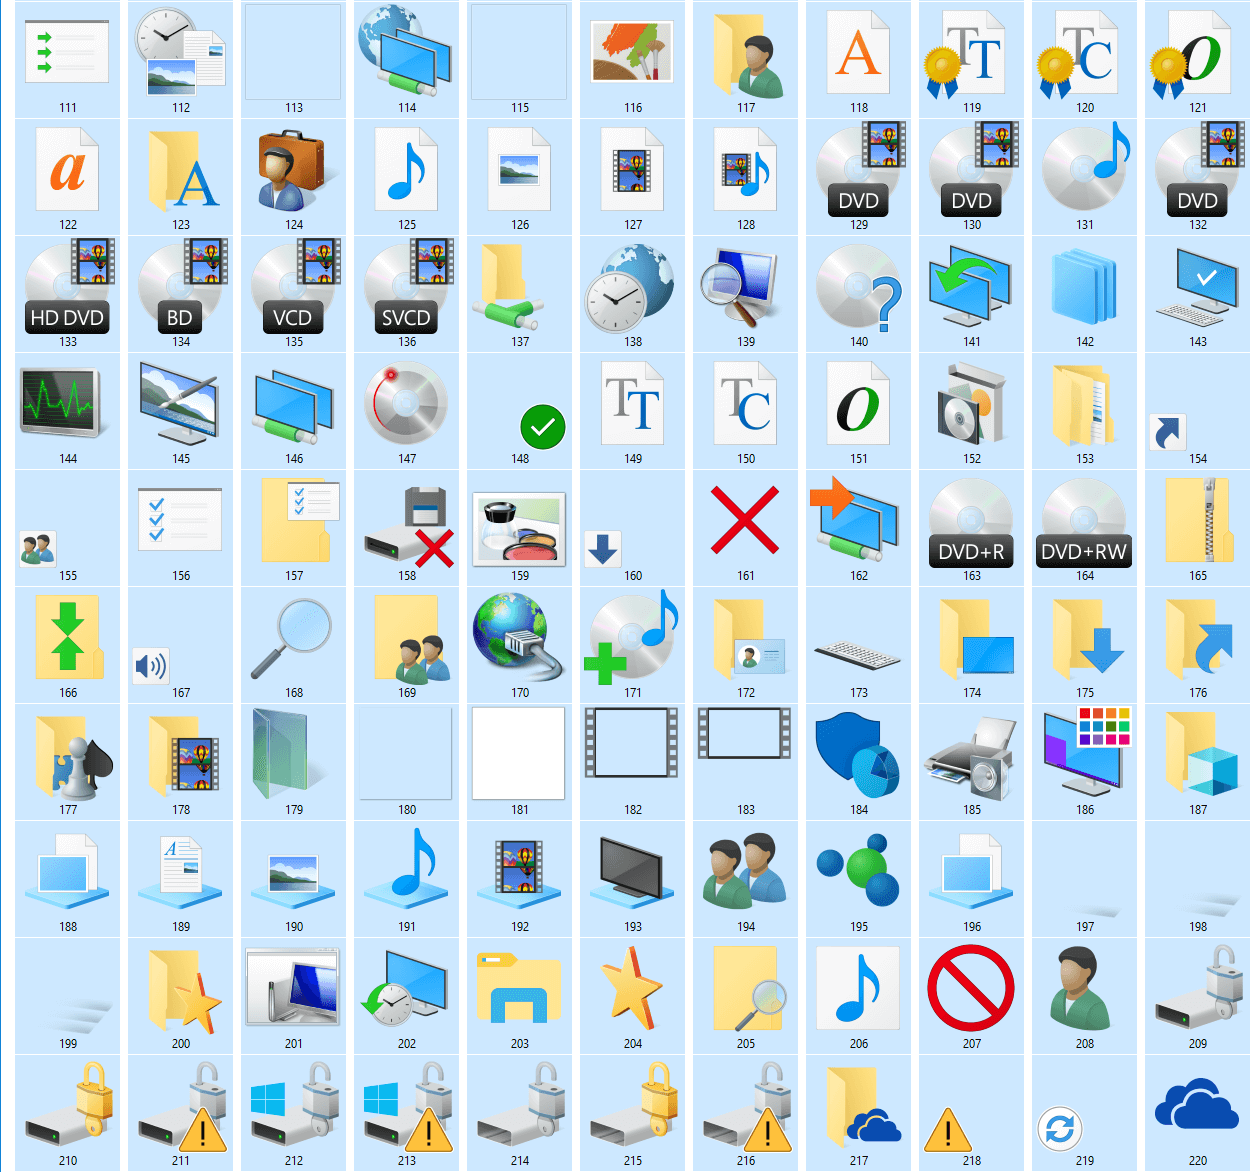 Windows 10 icons of imageres.dll (2/4)